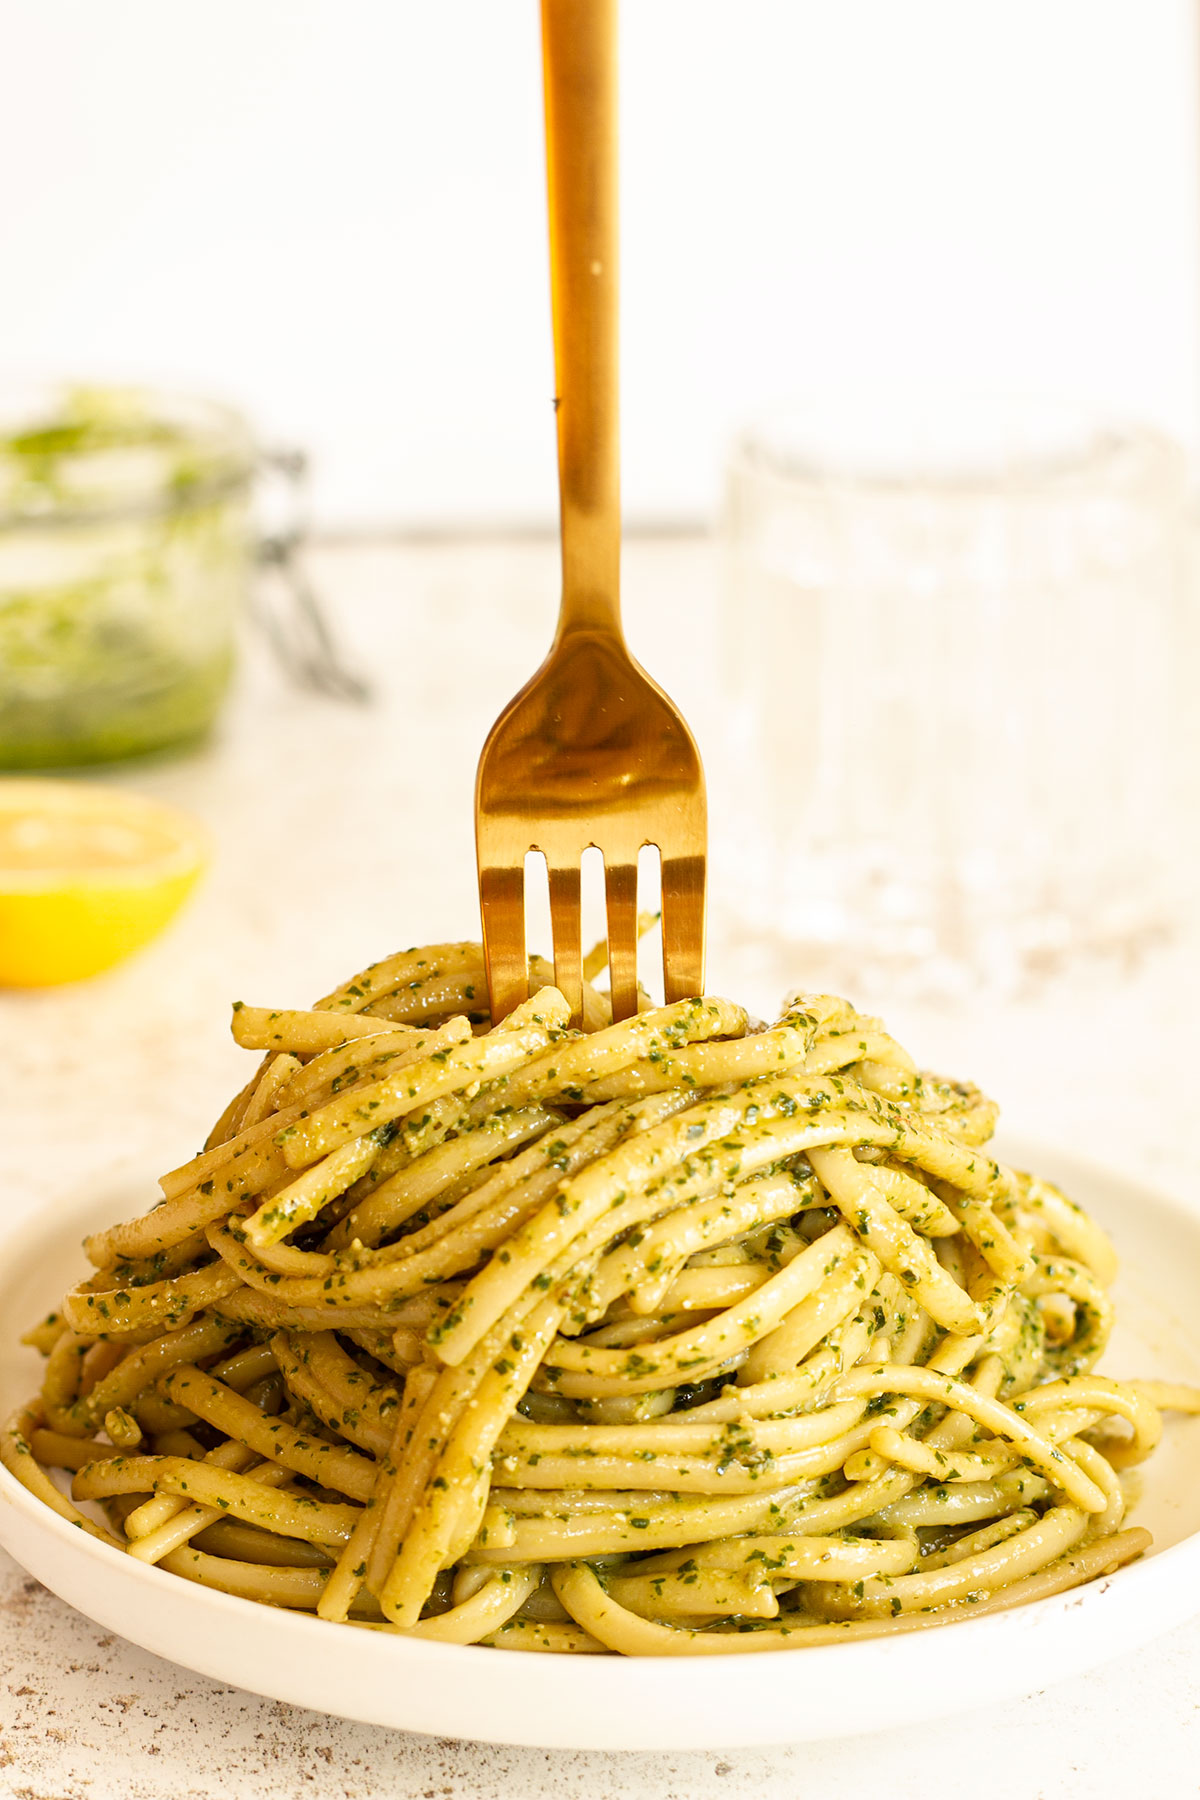 Pesto pasta served on a white plate with a half lemon in the background.